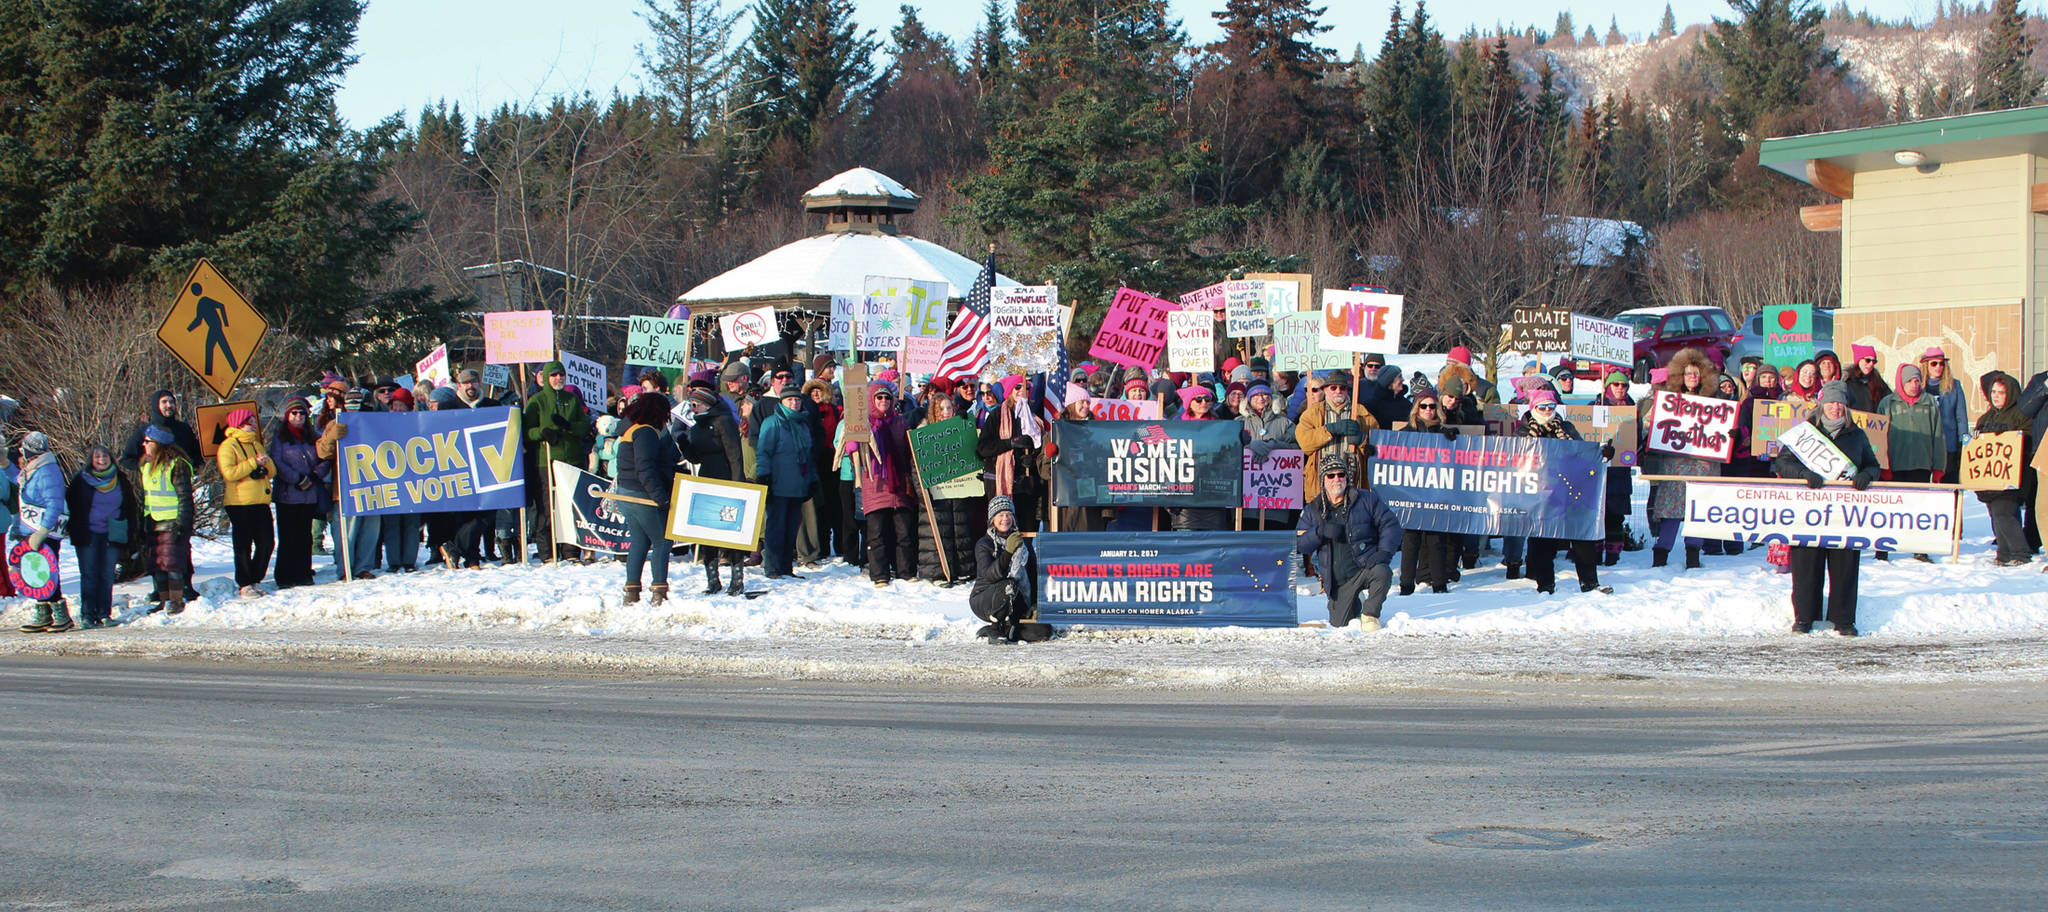 About 300 men, women and children gather at WKFL Park for a photo after completing this year’s Women’s March on Homer on Saturday, Jan. 18, 2020 in Homer, Alaska. Marchers started at the Homer Education and Recreation Complex and walked along Pioneer Avenue. (Photo by Megan Pacer/Homer News)